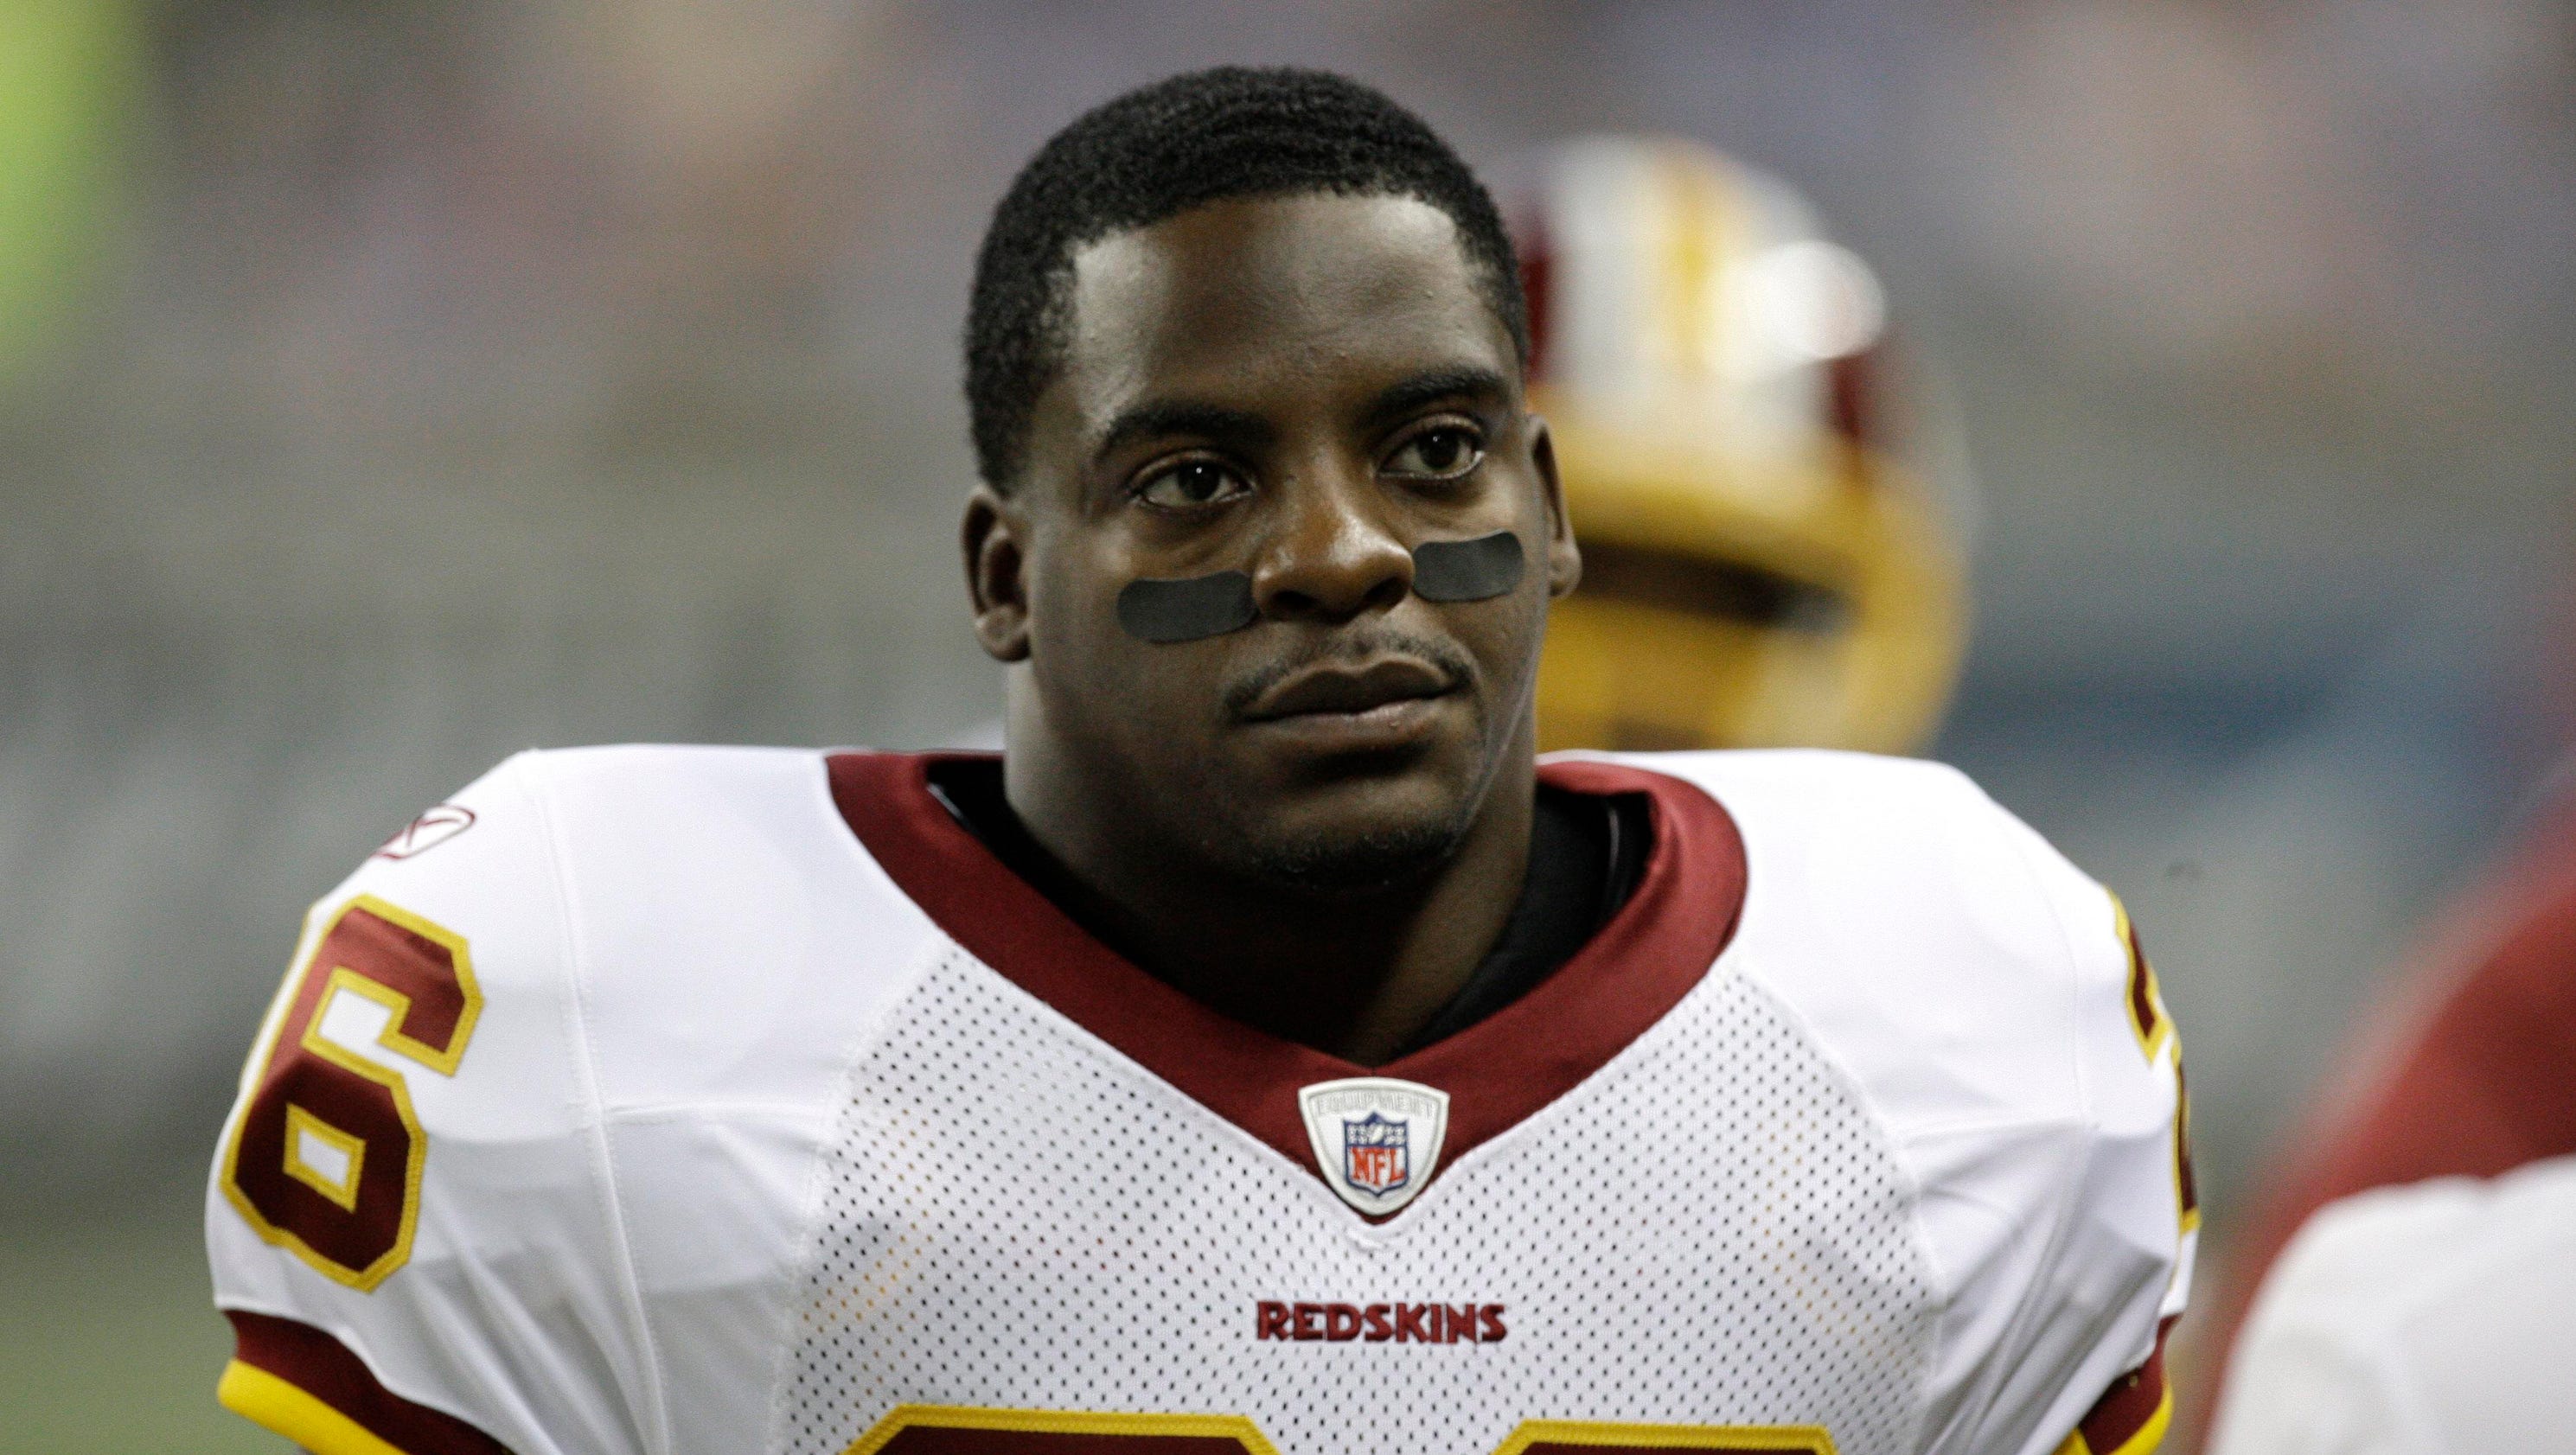 Clinton Portis owes nearly $5 million, counts mother as creditor